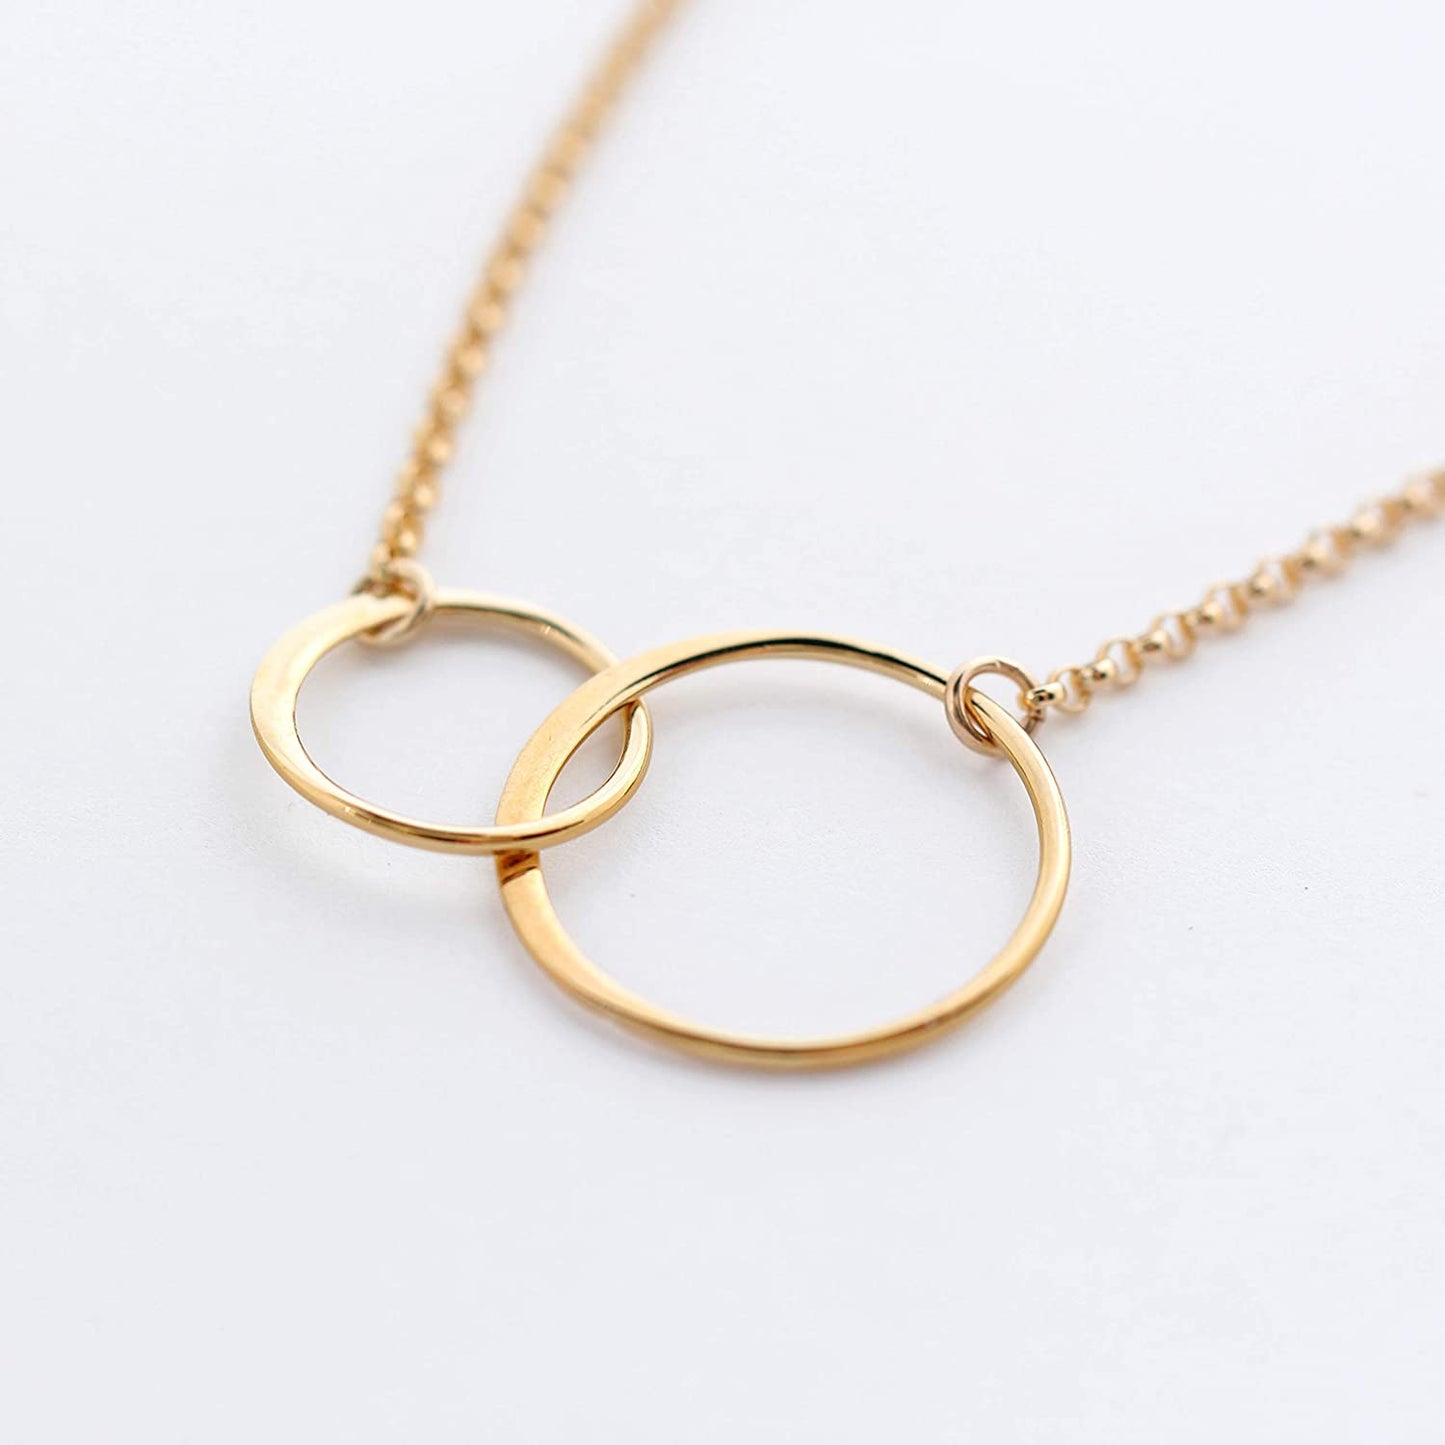 Cousin Gifts for Women Girls • Card and Gift for Cousin Woman • 2 Connected Eternity Circles • 14k Gold Necklace • Gifts for Cousins • Family Jewelry • Friends Forever • Friendship Love Quote Saying